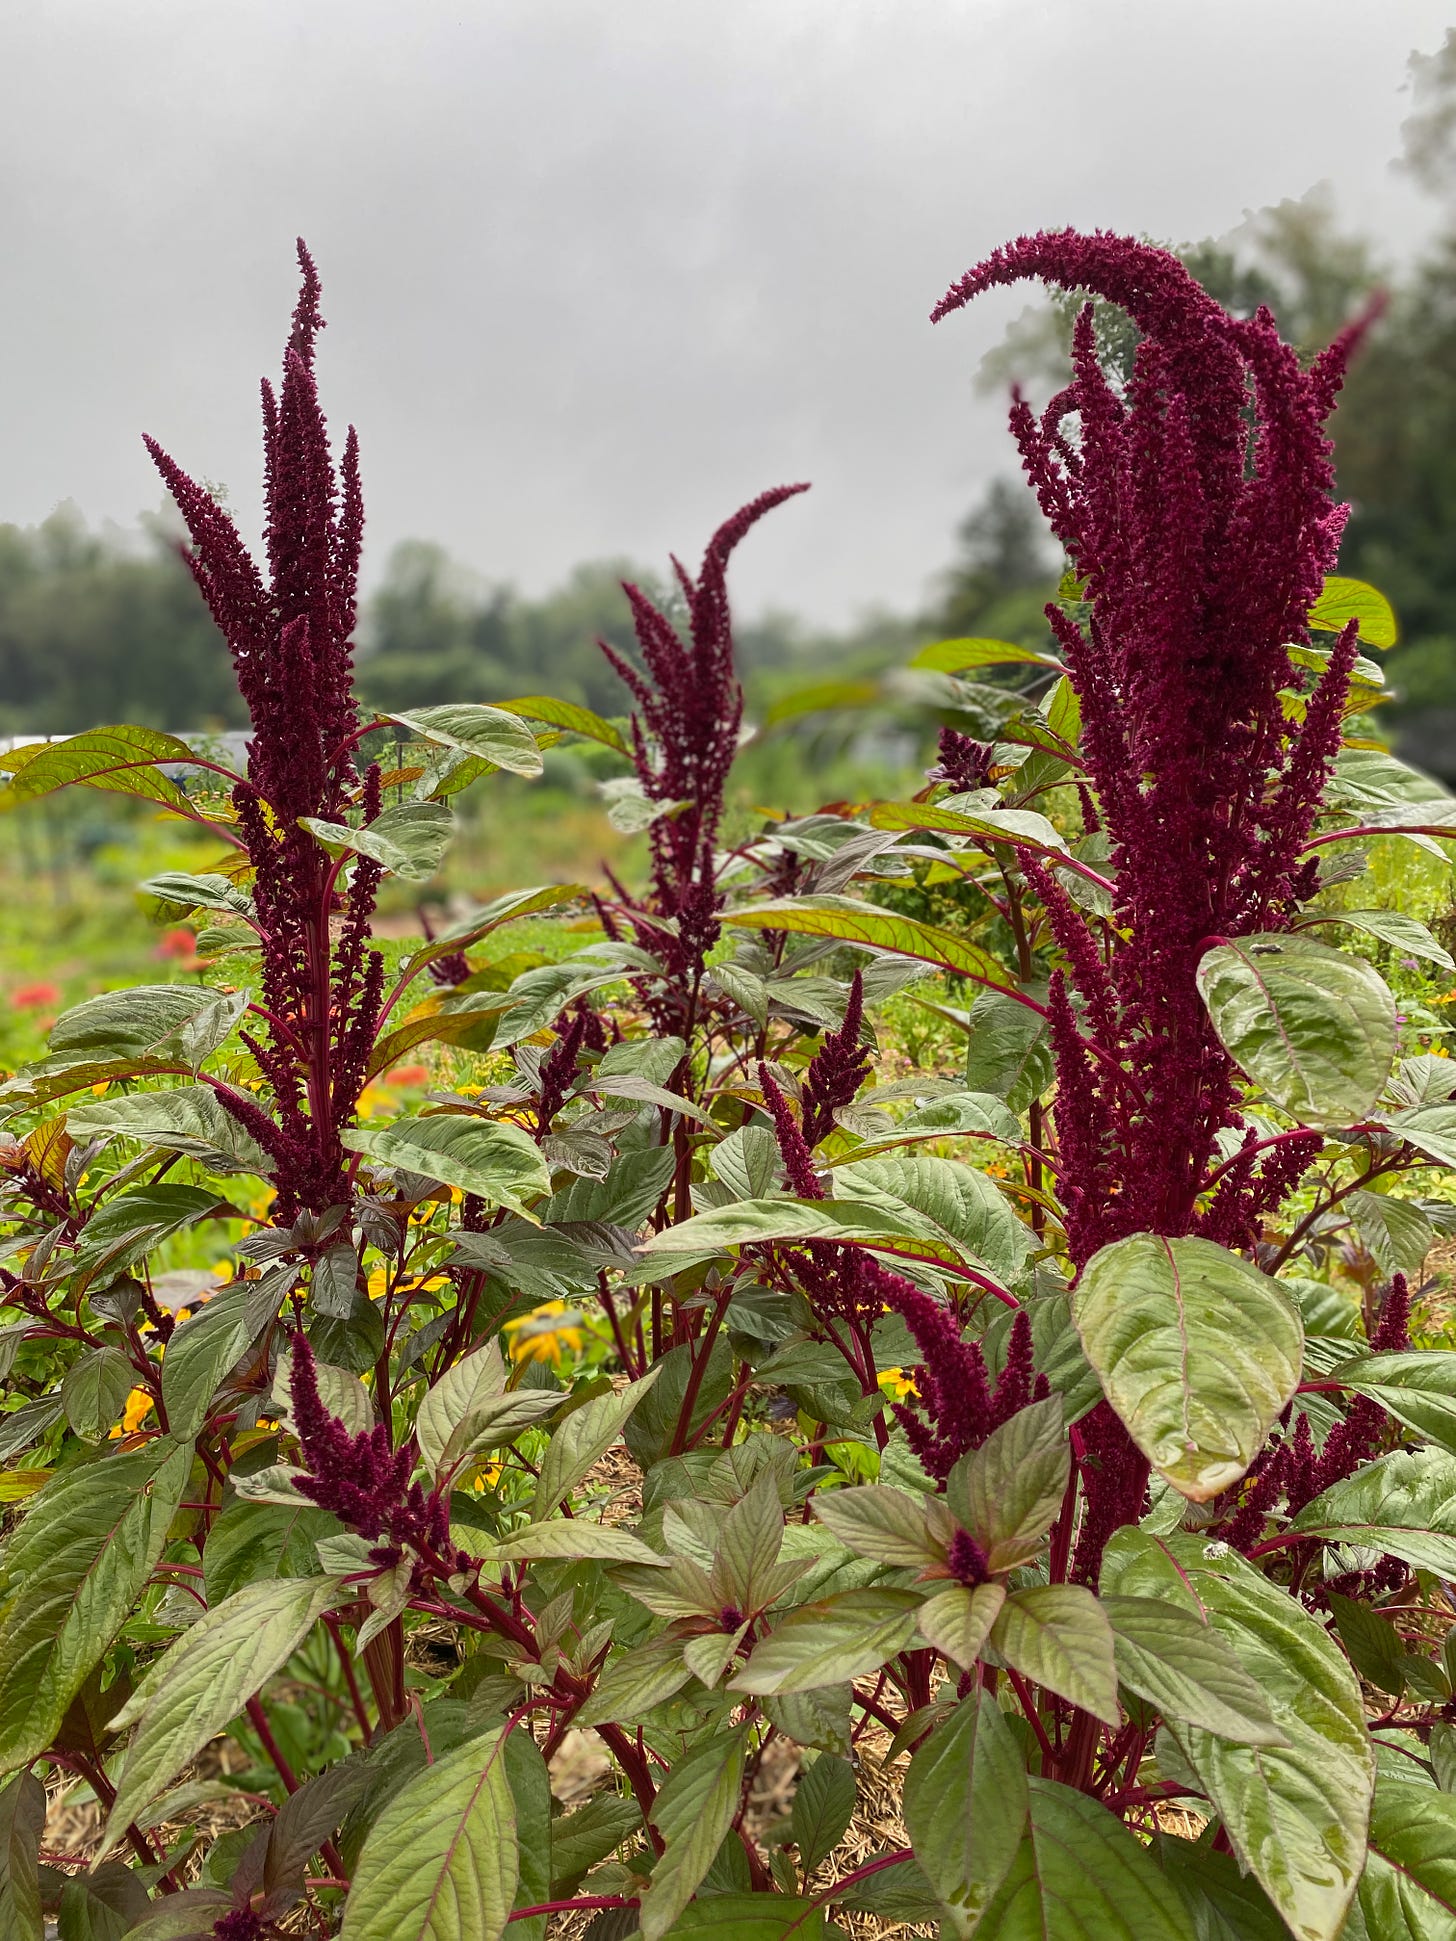 Several tall amaranth stalks, with tall, spiky red flowers, in front of a grey, cloudy sky. 